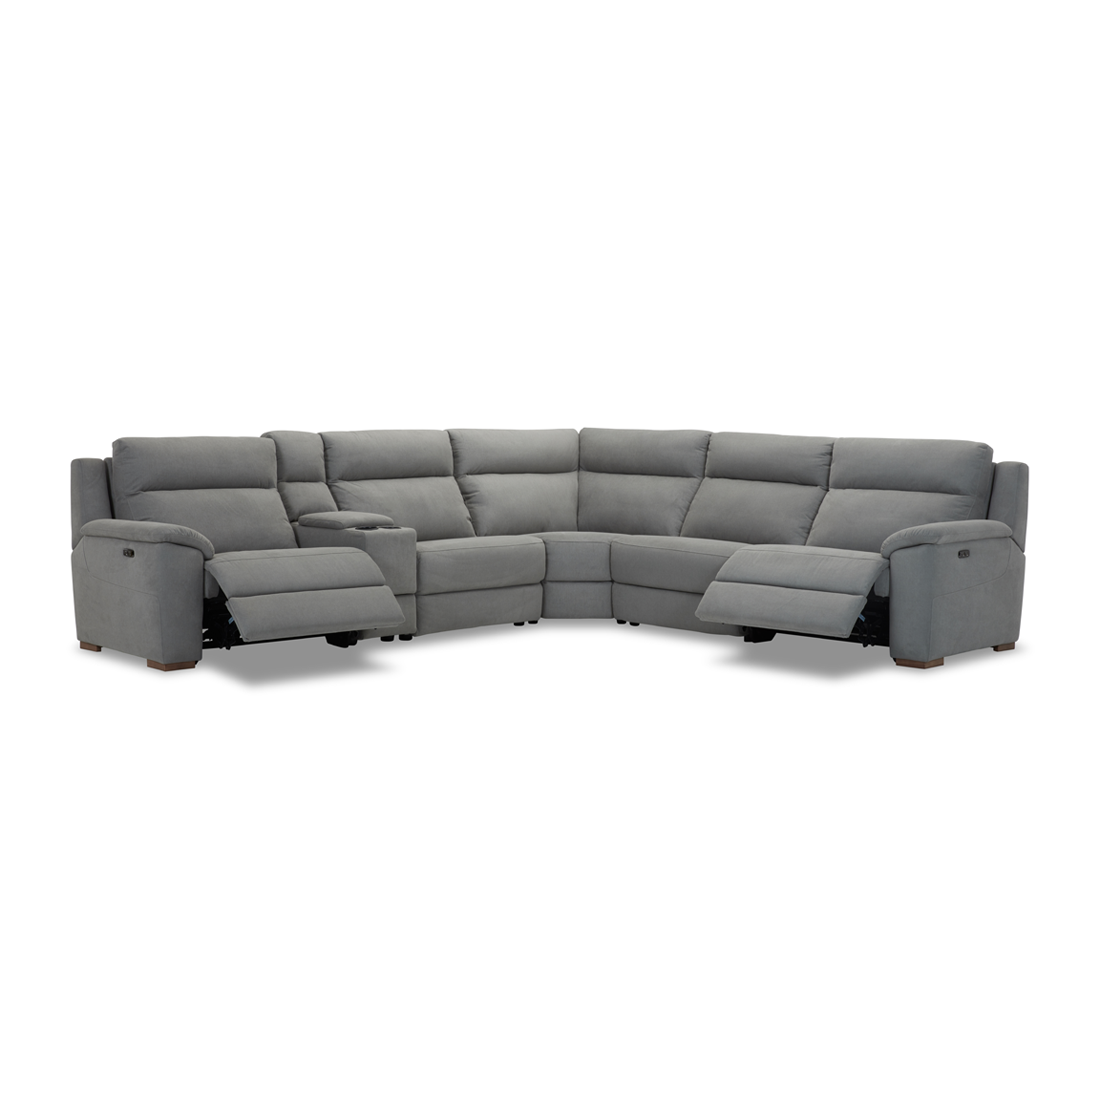 Vancouver Fabric Corner Modular Lounge With Electric Recliners